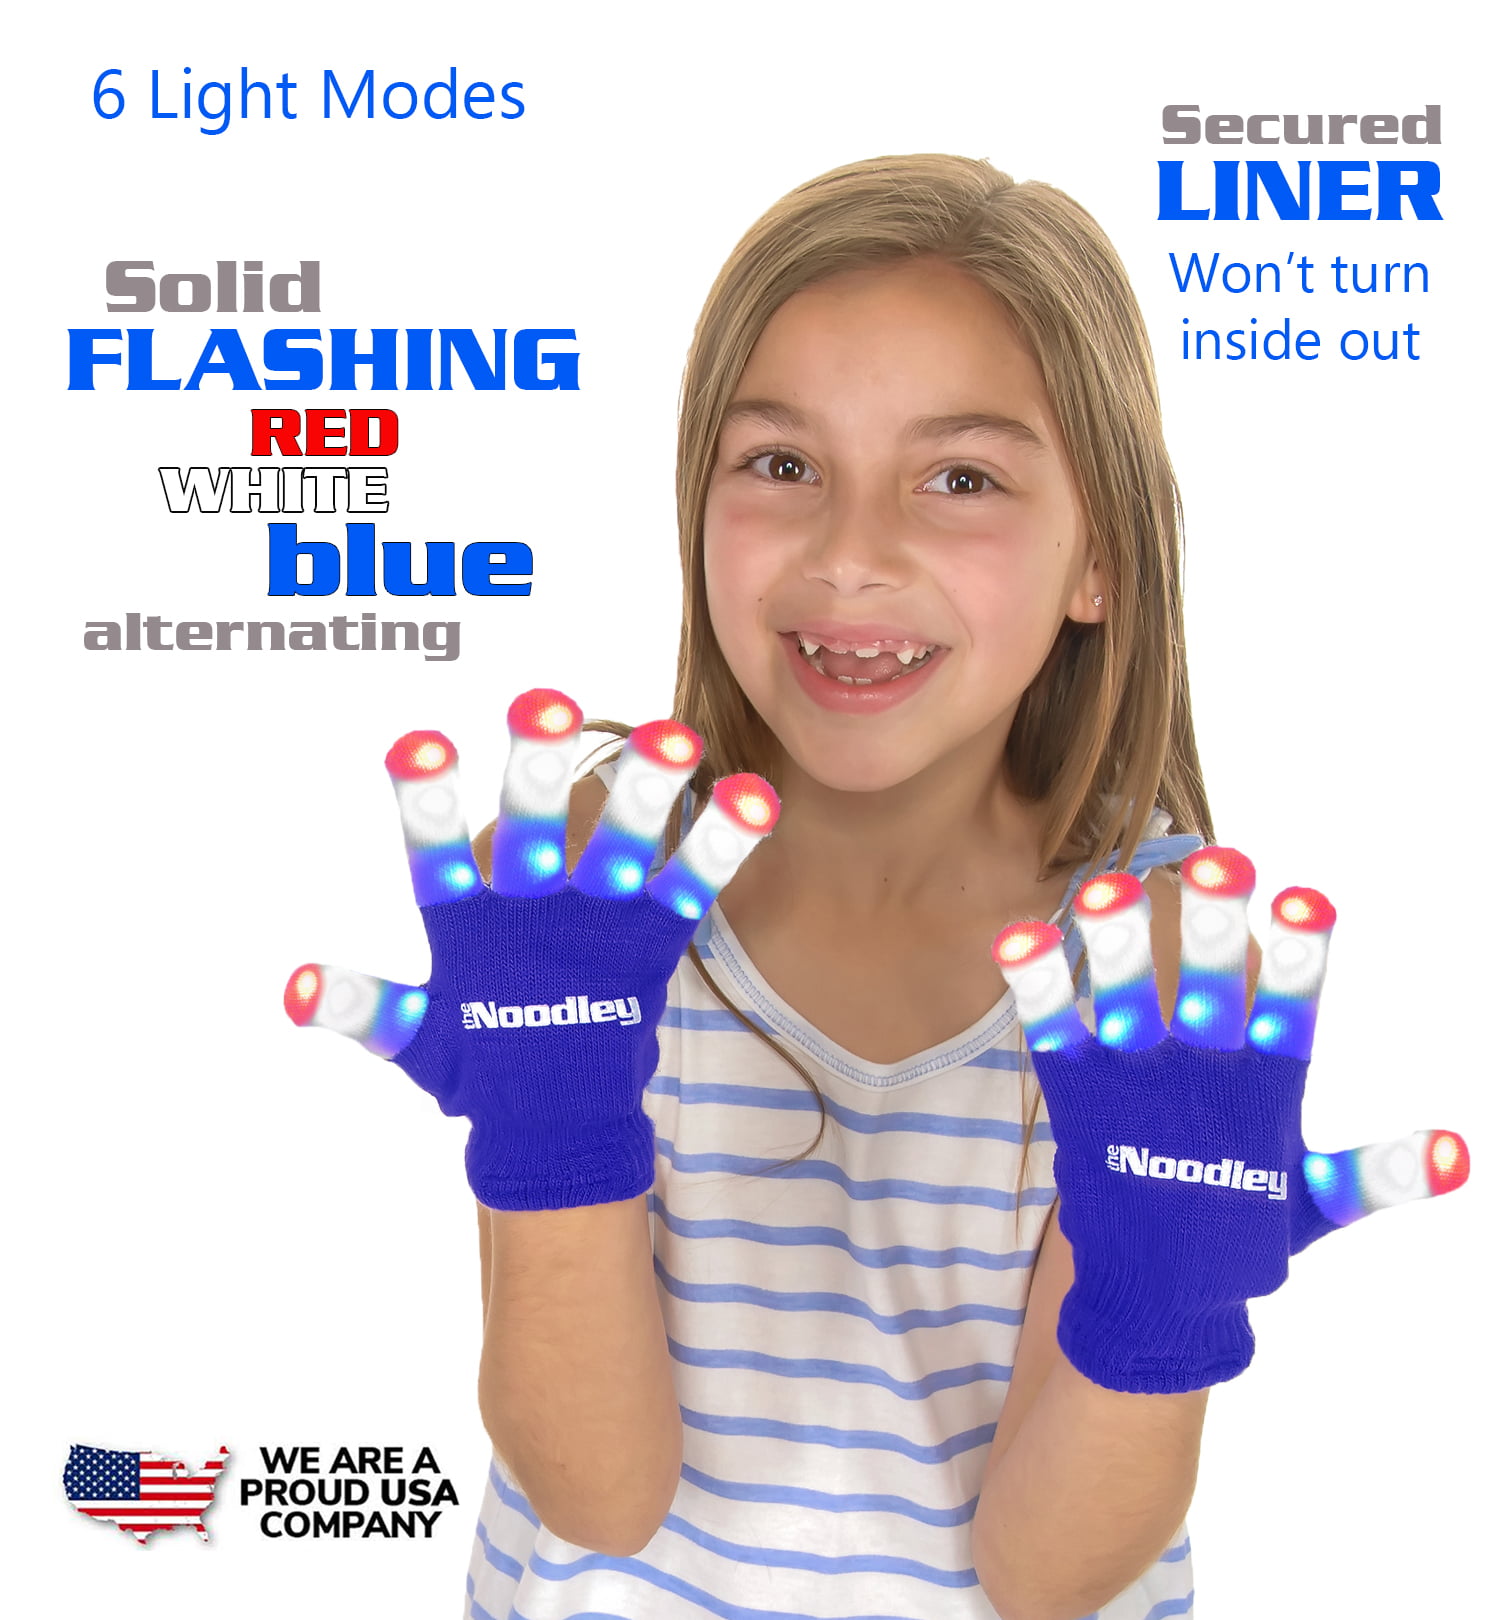 Large The Noodley Thin LED Light Up Gloves for Kids Cool Toys for Boys Gift Ideas Child Teen and Adult Size